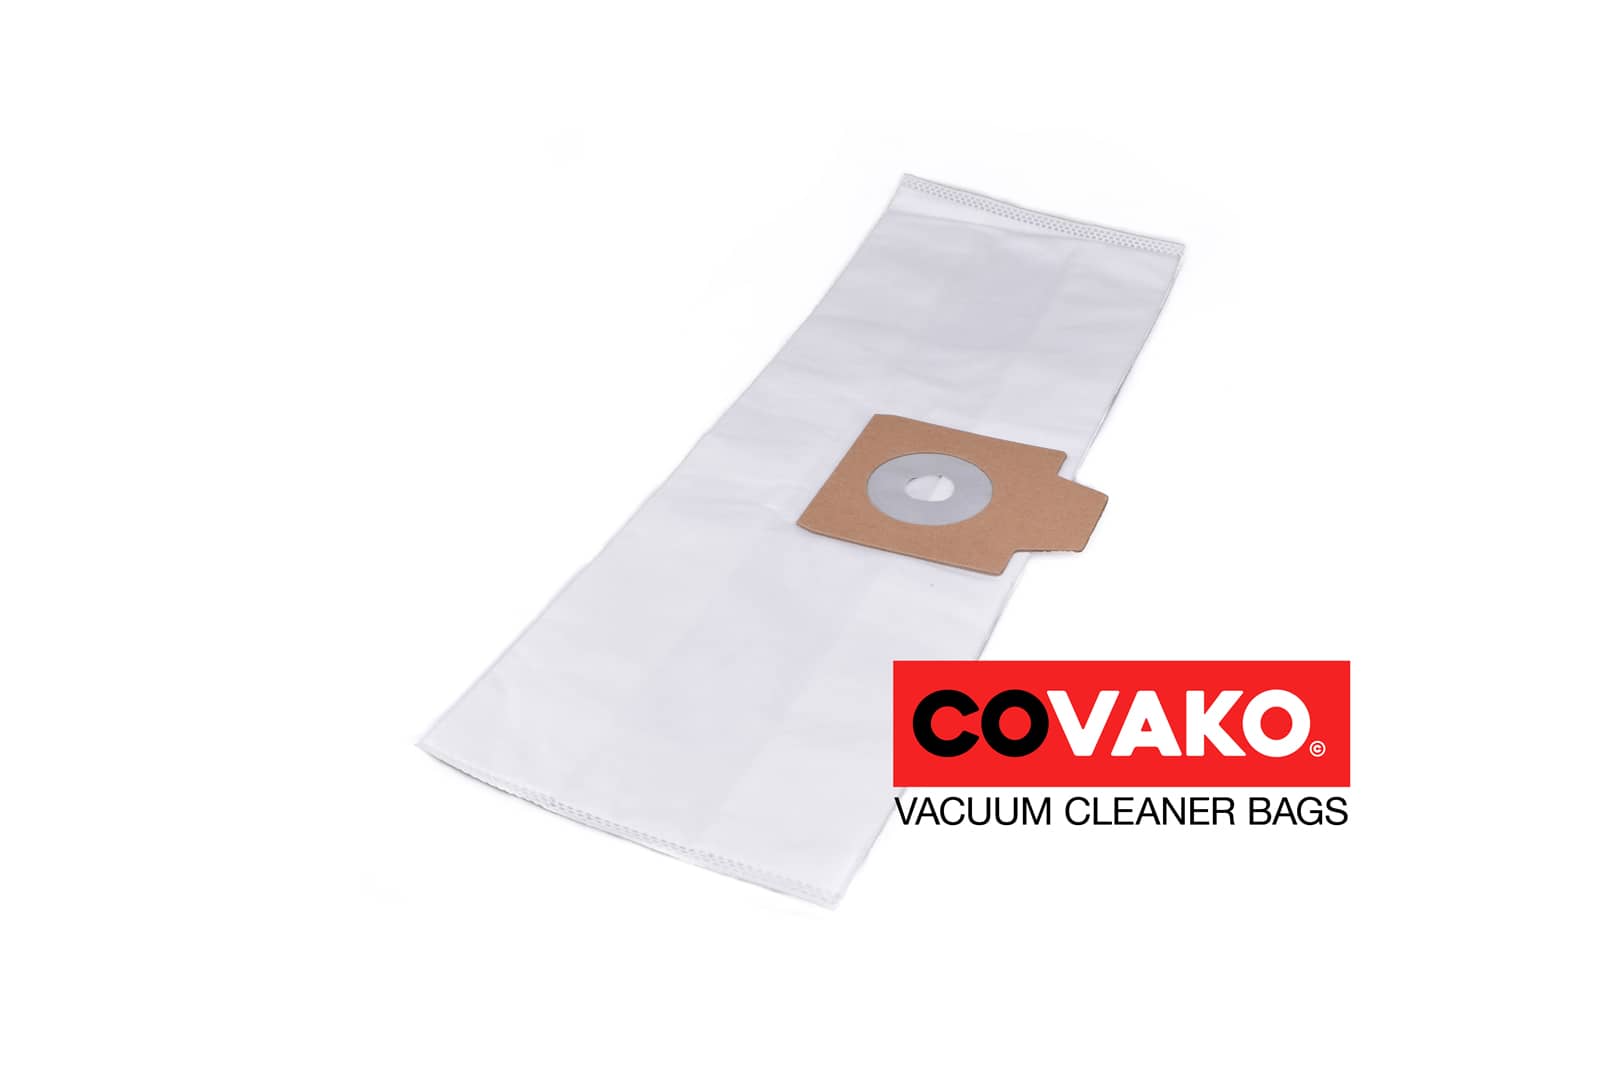 Electrolux UZ 872 / Synthesis - Electrolux vacuum cleaner bags